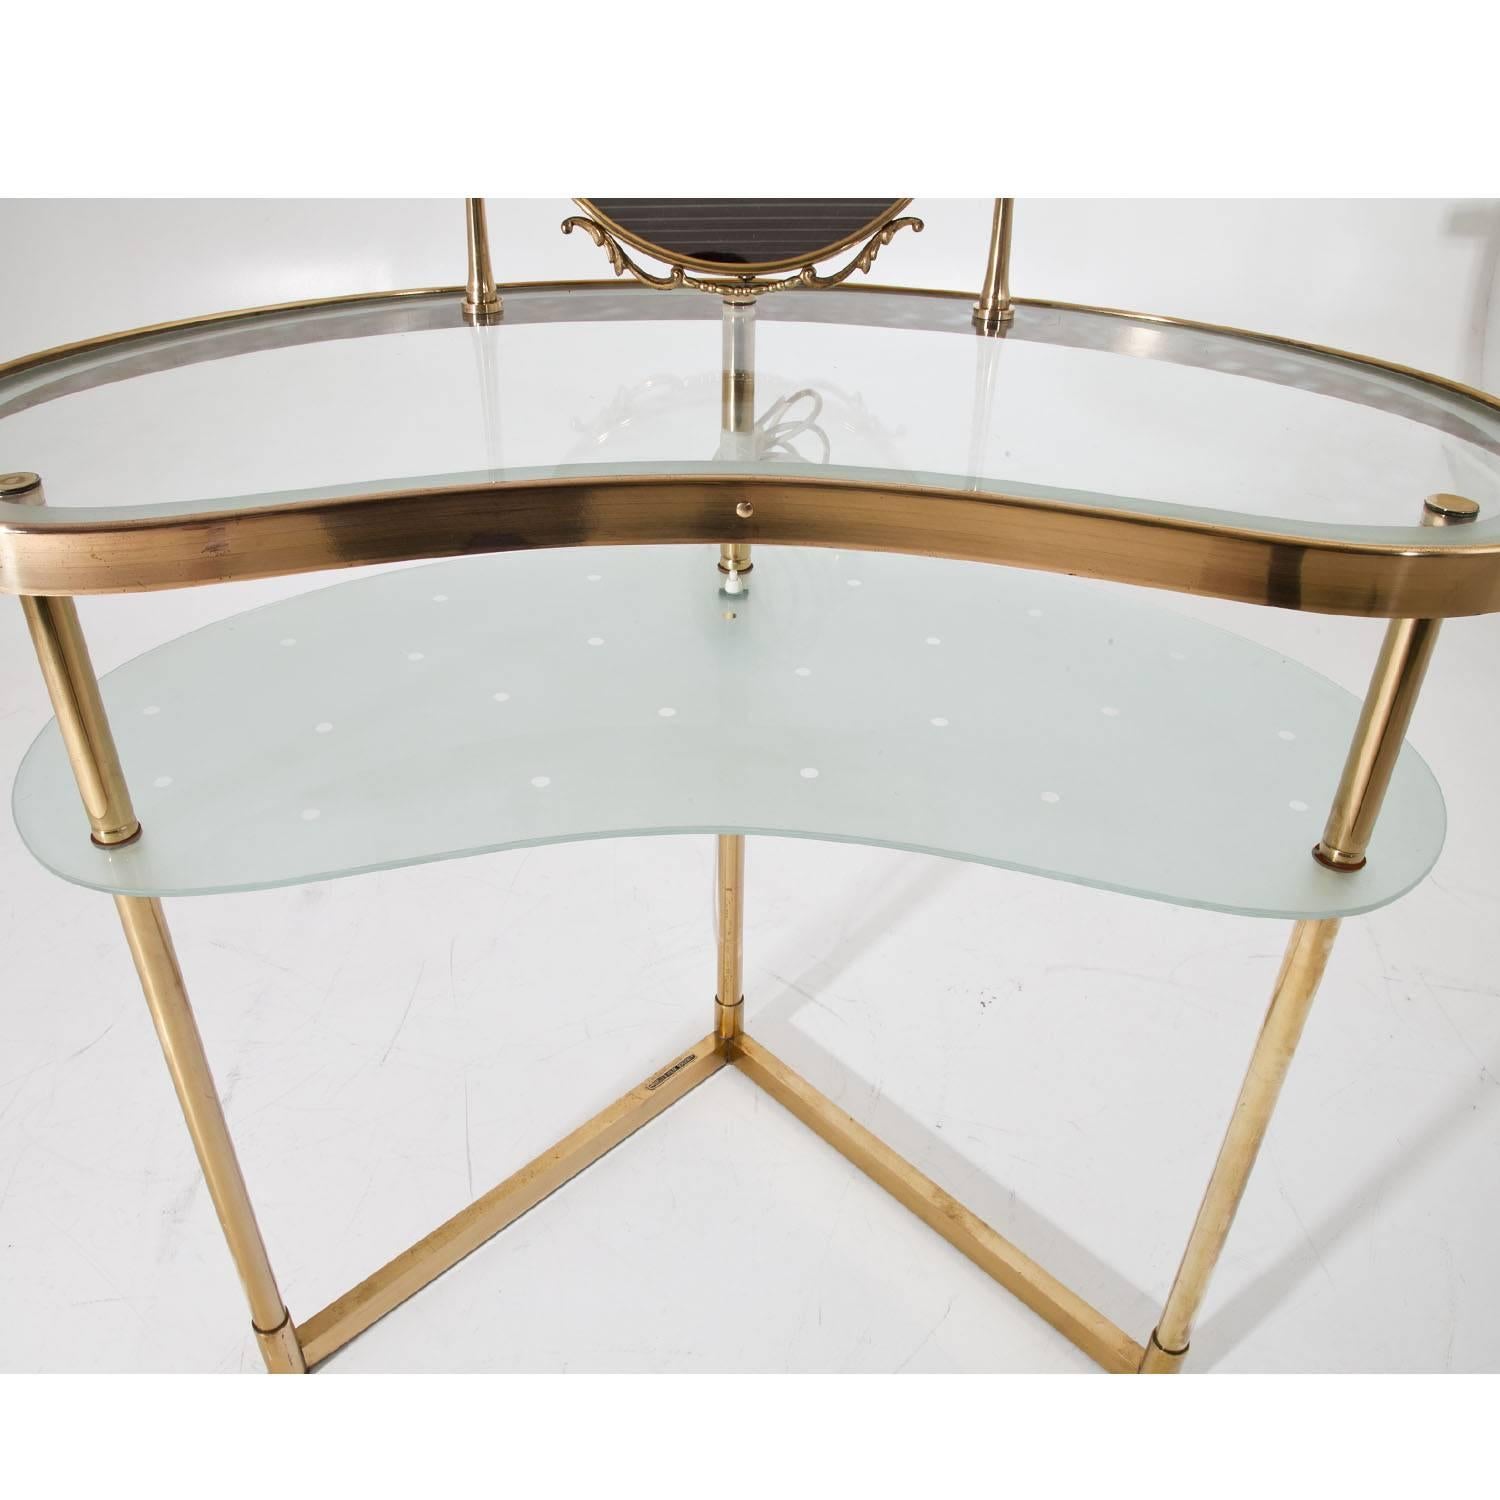 Midcentury vanity table on a three-legged brass base with a kidney-shaped tabletop and one shelf, decorated with dots. The oval mirror is tilt able. The vanity can be illuminated from below with one light bulb, creating the perfect lighting